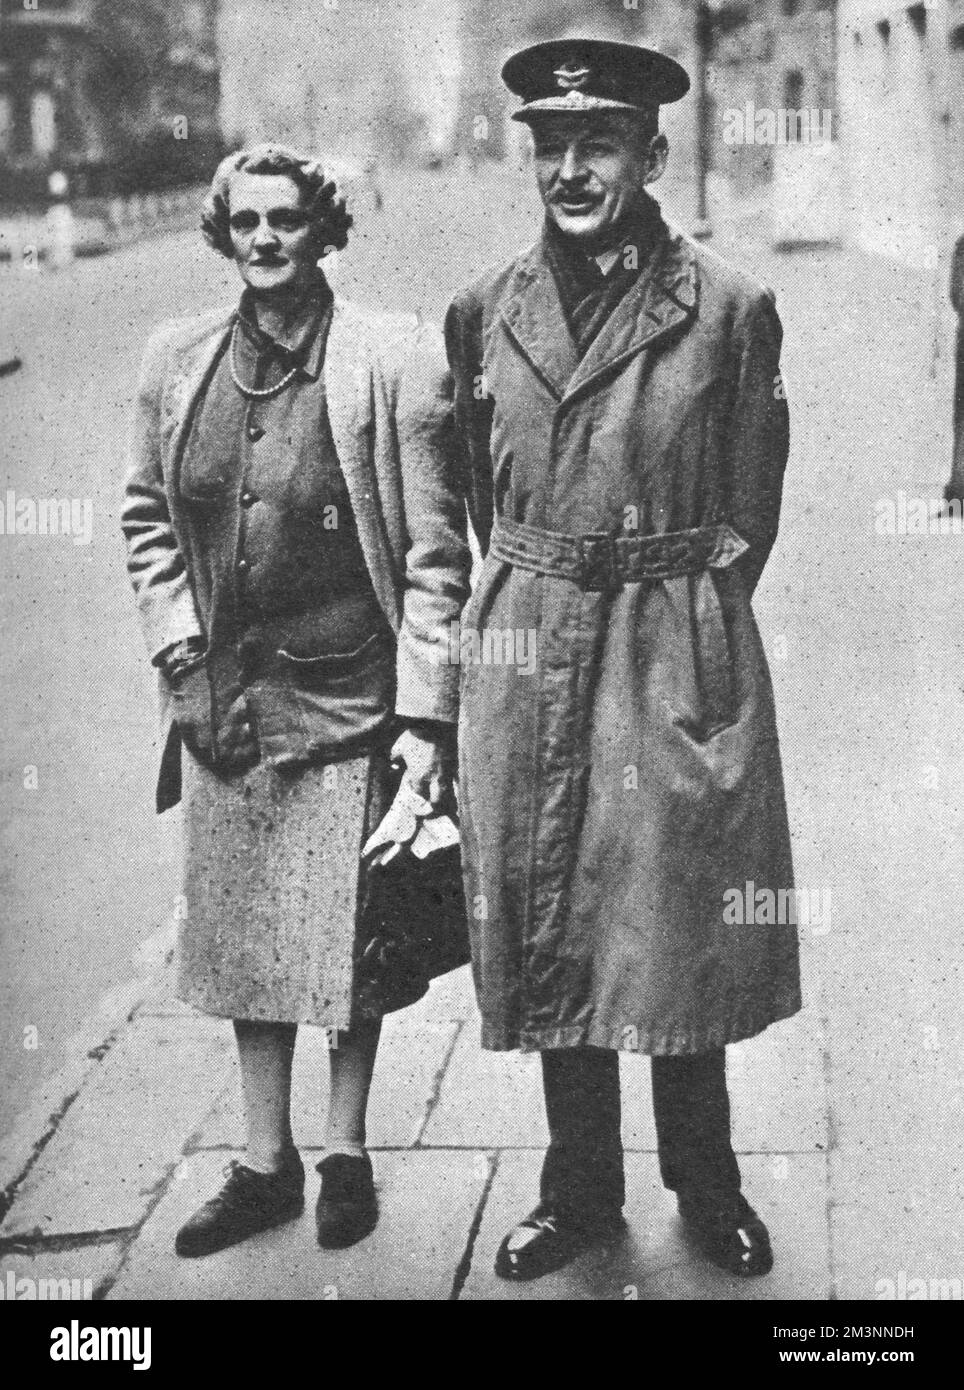 Air Chief-Marshal Sir Robert Brooke-Popham, pictured with his wife in London following their return from the Far East. Formerly the British Commander-in-Chief of the Far East command, Brooke-Popham had stepped down from the post at the end of 1941. He and his wife arrived back in Britain shortly before the Japanese advance resulted in the fall of Singapore on 15 February 1942.     Date: February 1942 Stock Photo